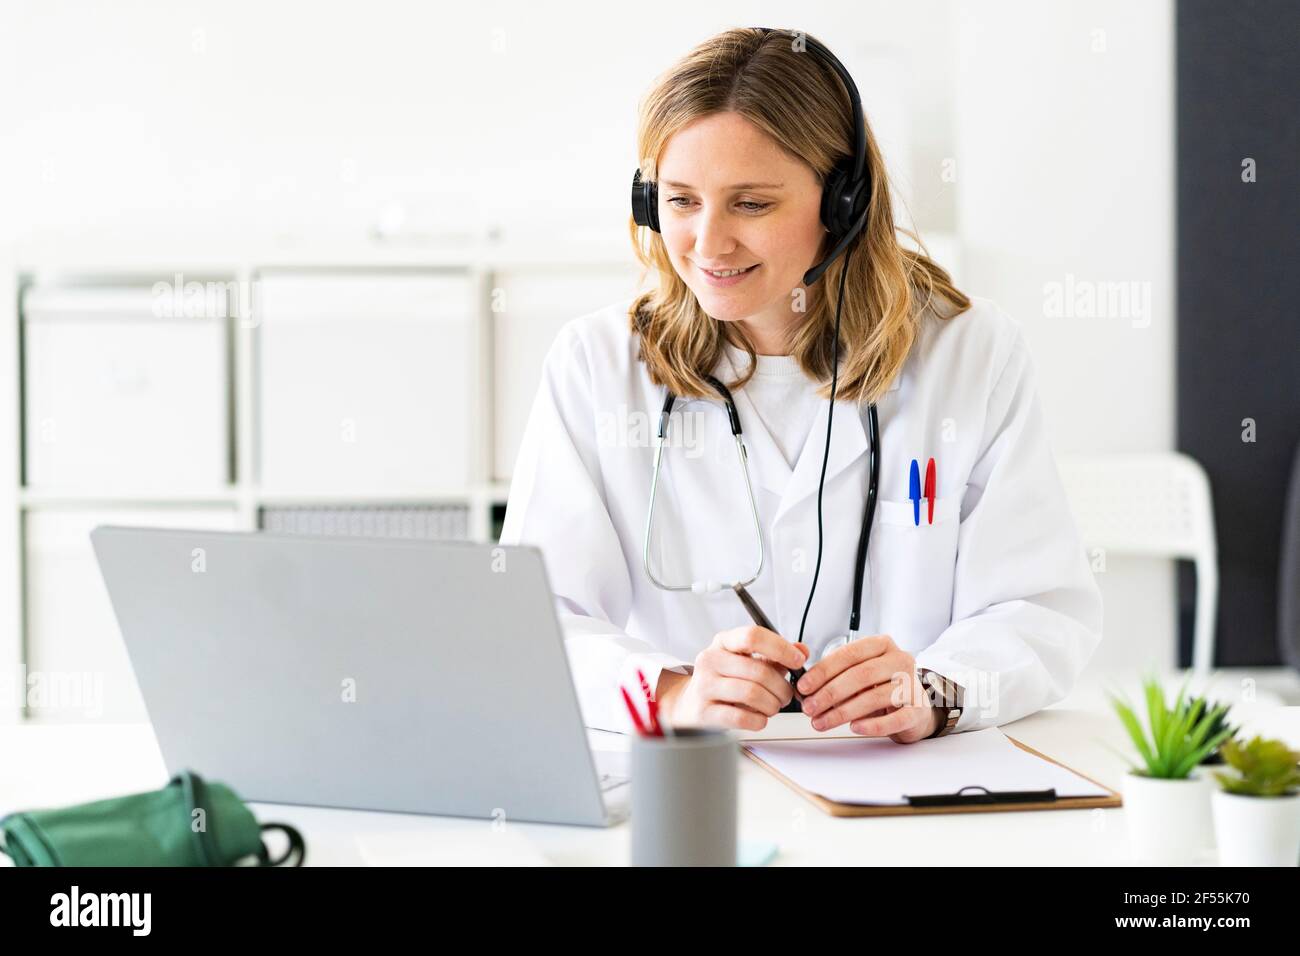 Blond female doctor giving online consultation on laptop in medical clinic Stock Photo